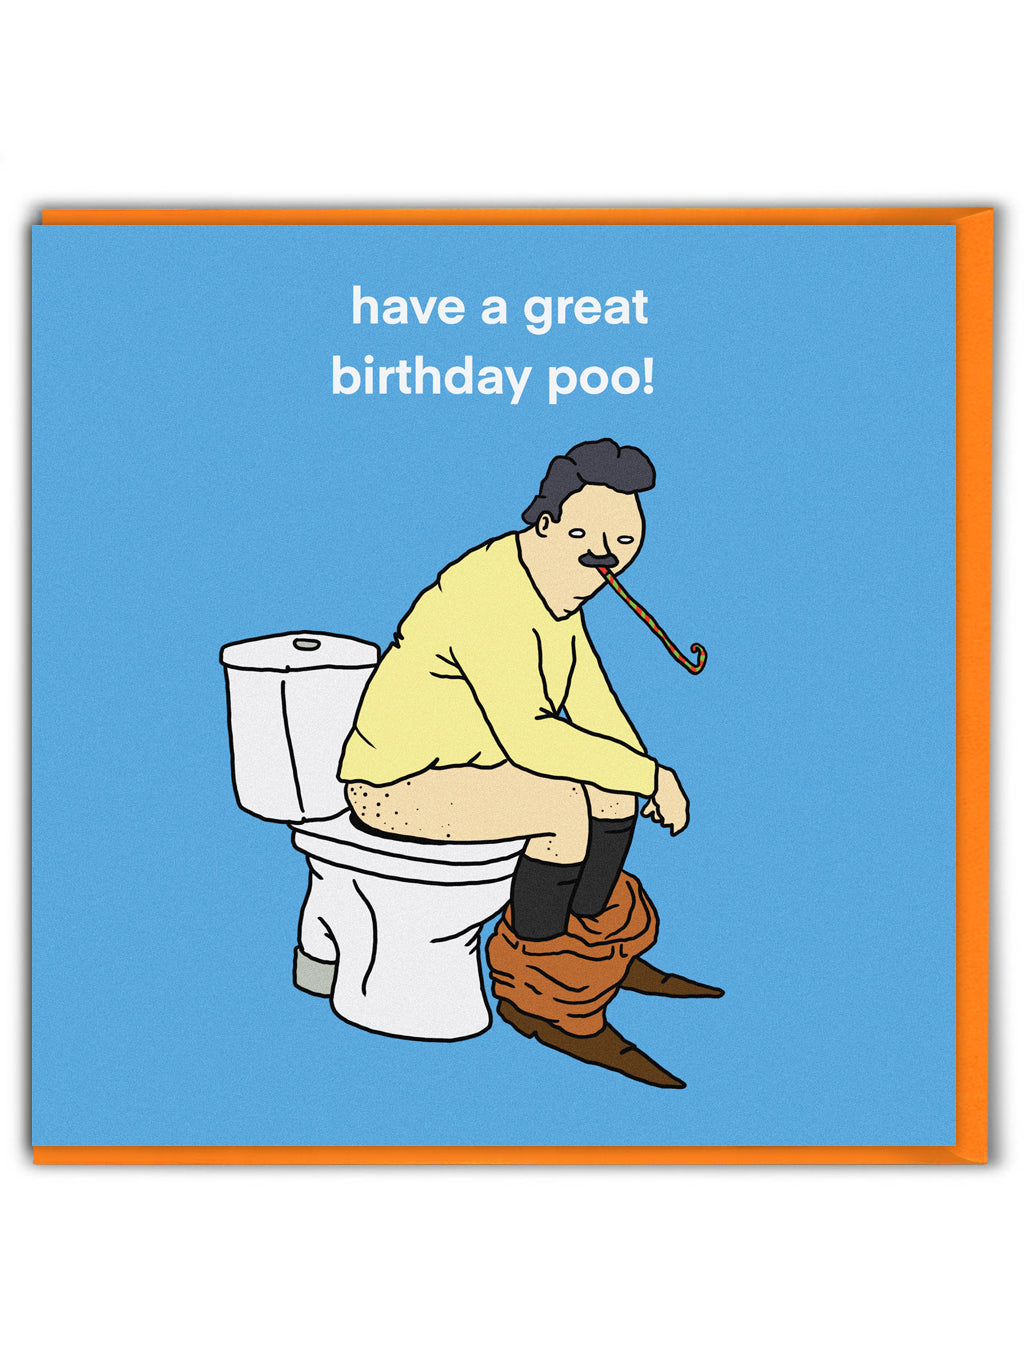 A greetings card with a sky blue background and the illustration of a white man sitting on the toilet blowing a party blower. the words above him read 'have a great birthday poo!'